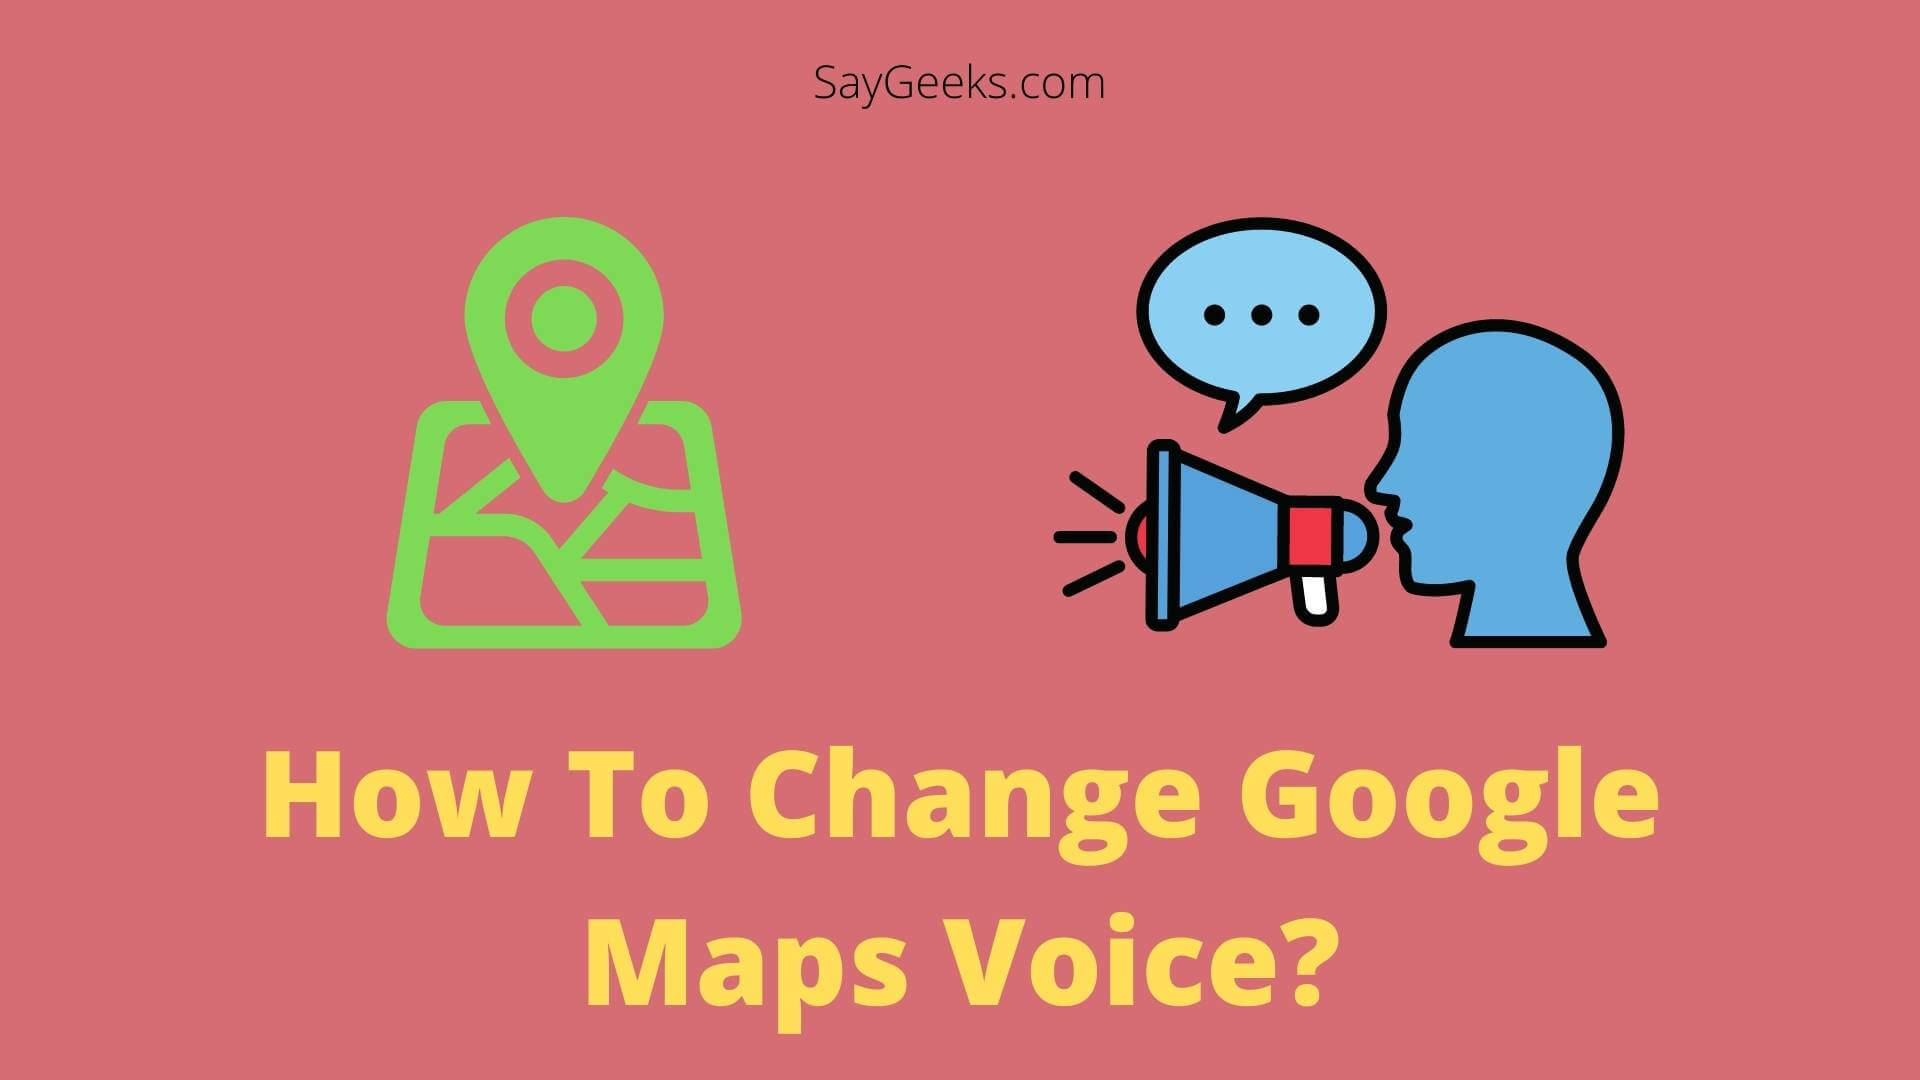 How To Change Google Maps Voice